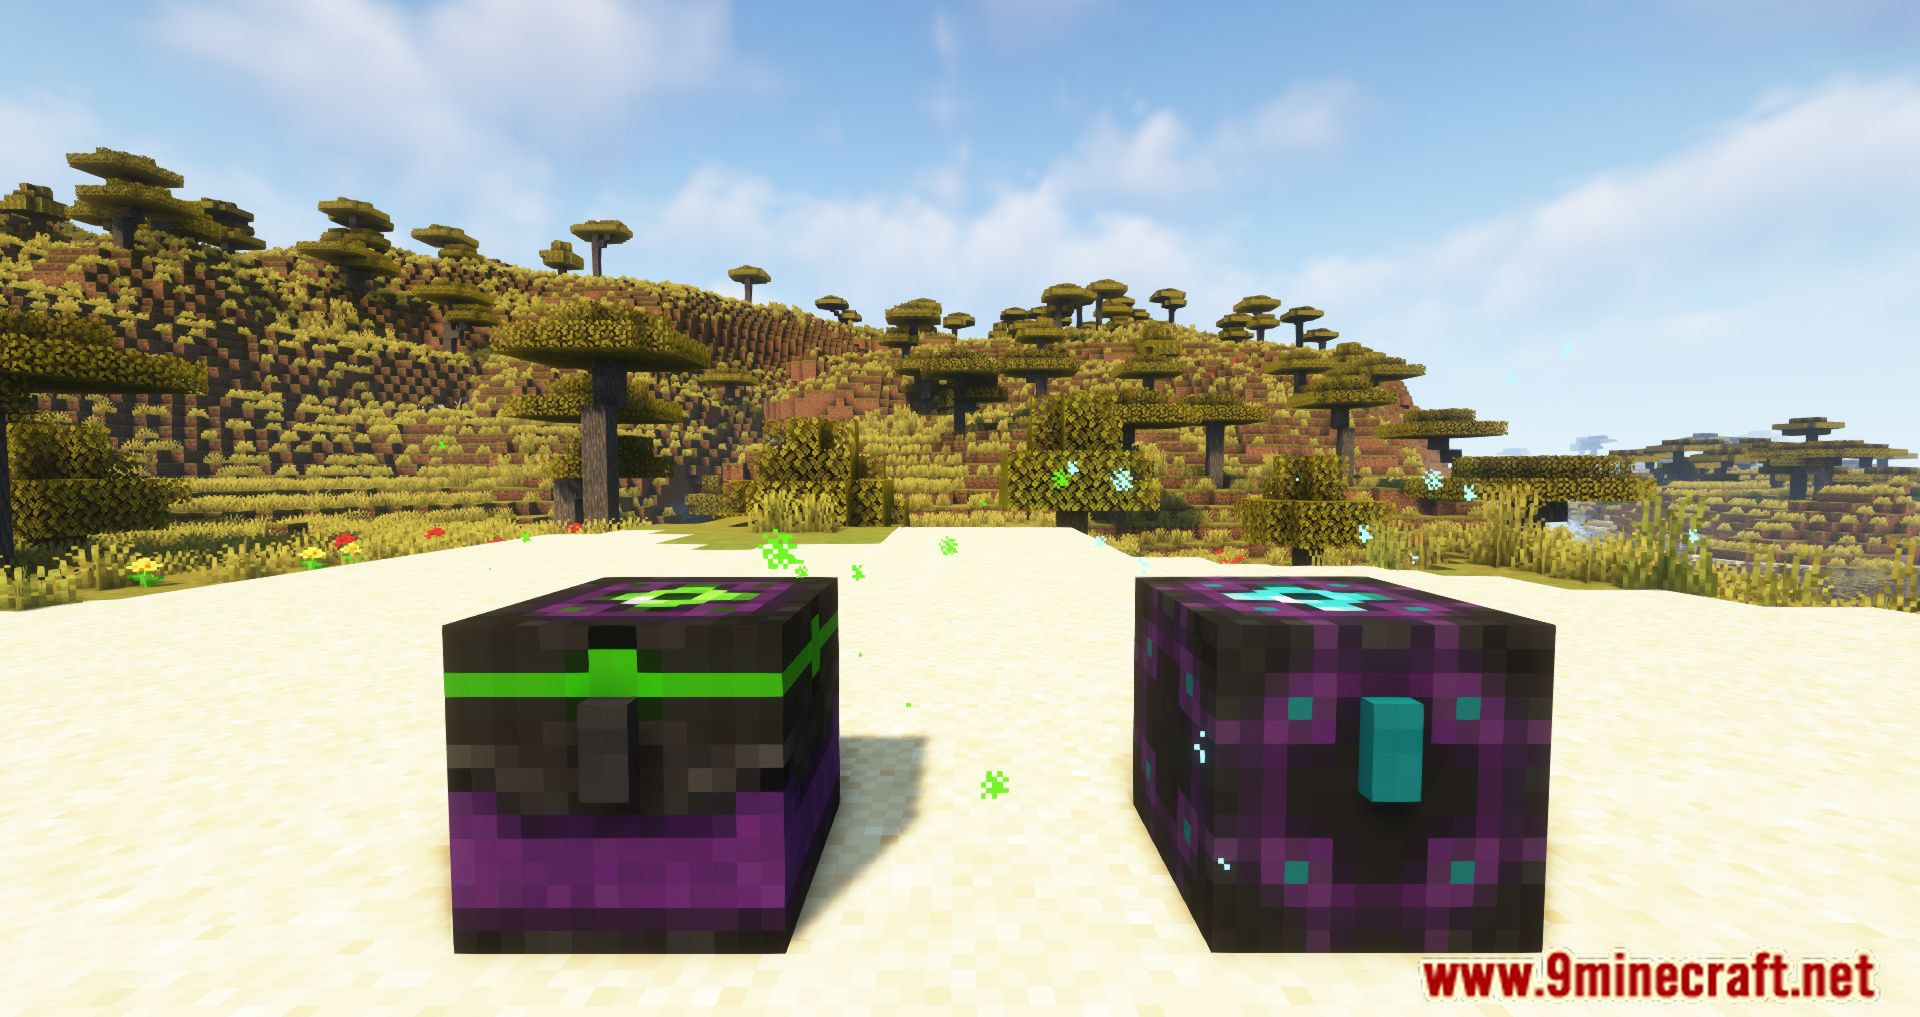 Minecraft Update 1.3.1 Released, Adds Ender Chests, Tripwire and